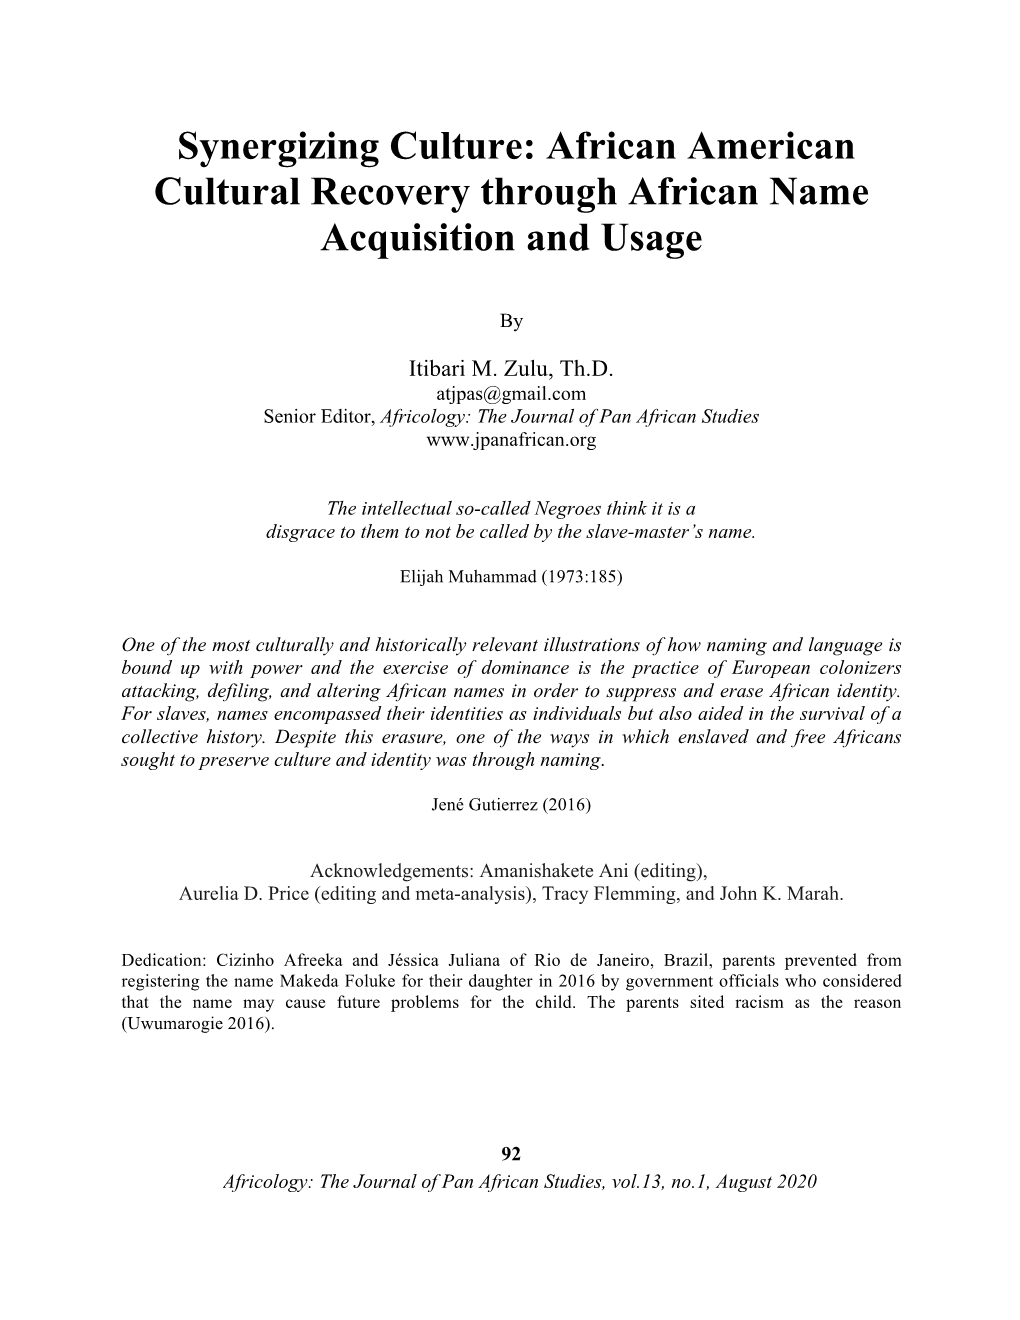 African American Cultural Recovery Through African Name Acquisition and Usage